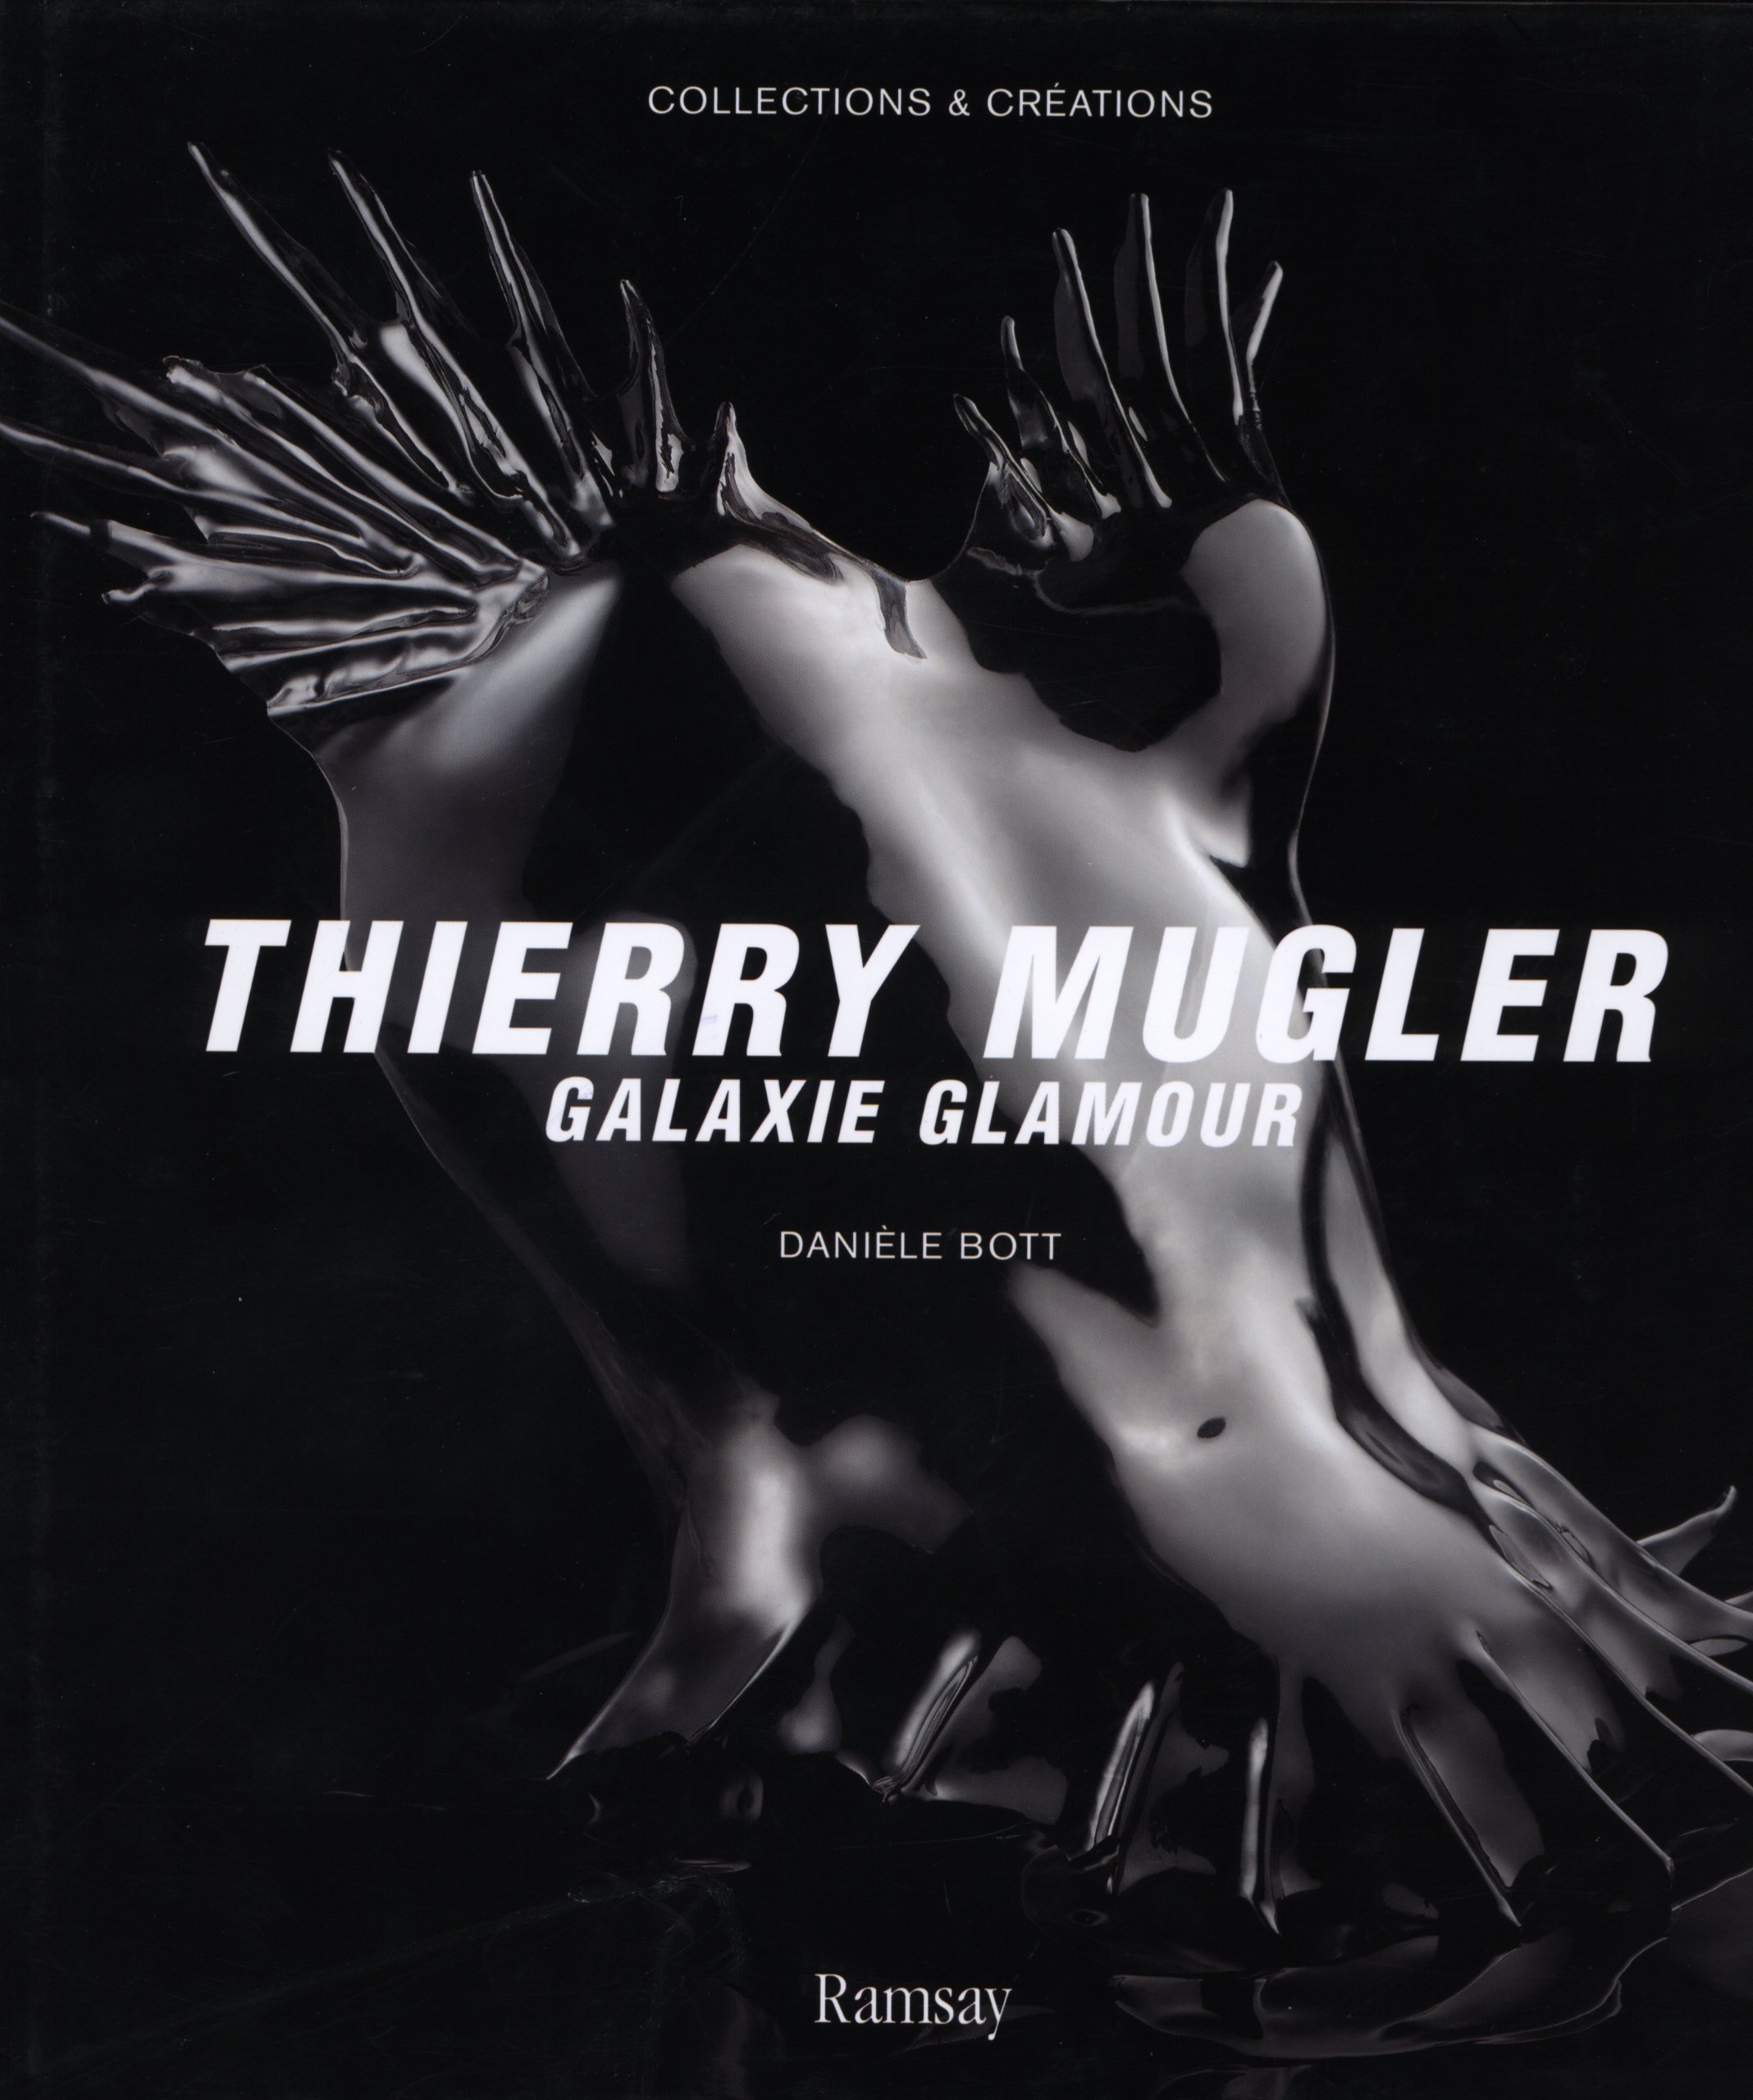 Initially trained as a ballet dancer, Thierry Mugler founded his own label ...